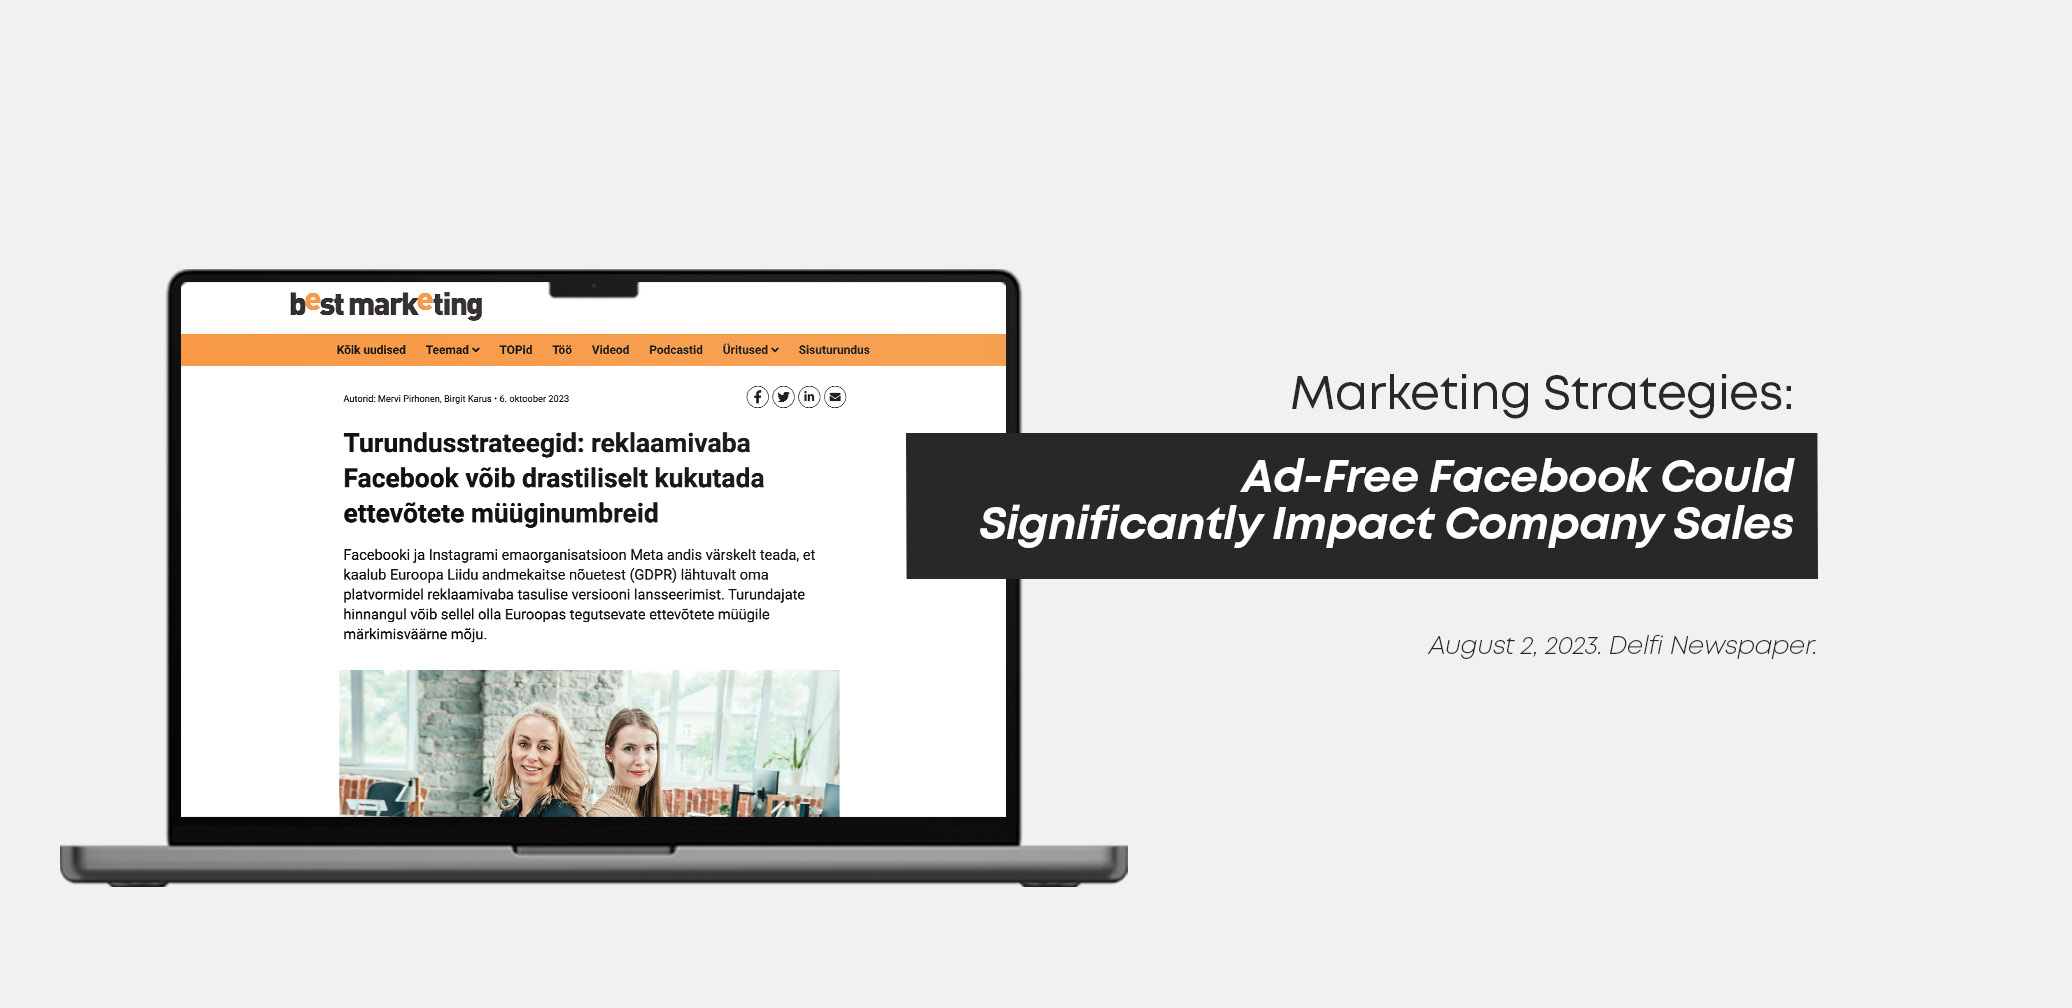 Marketing Strategies: Ad-Free Facebook Could Significantly Impact Company Sales